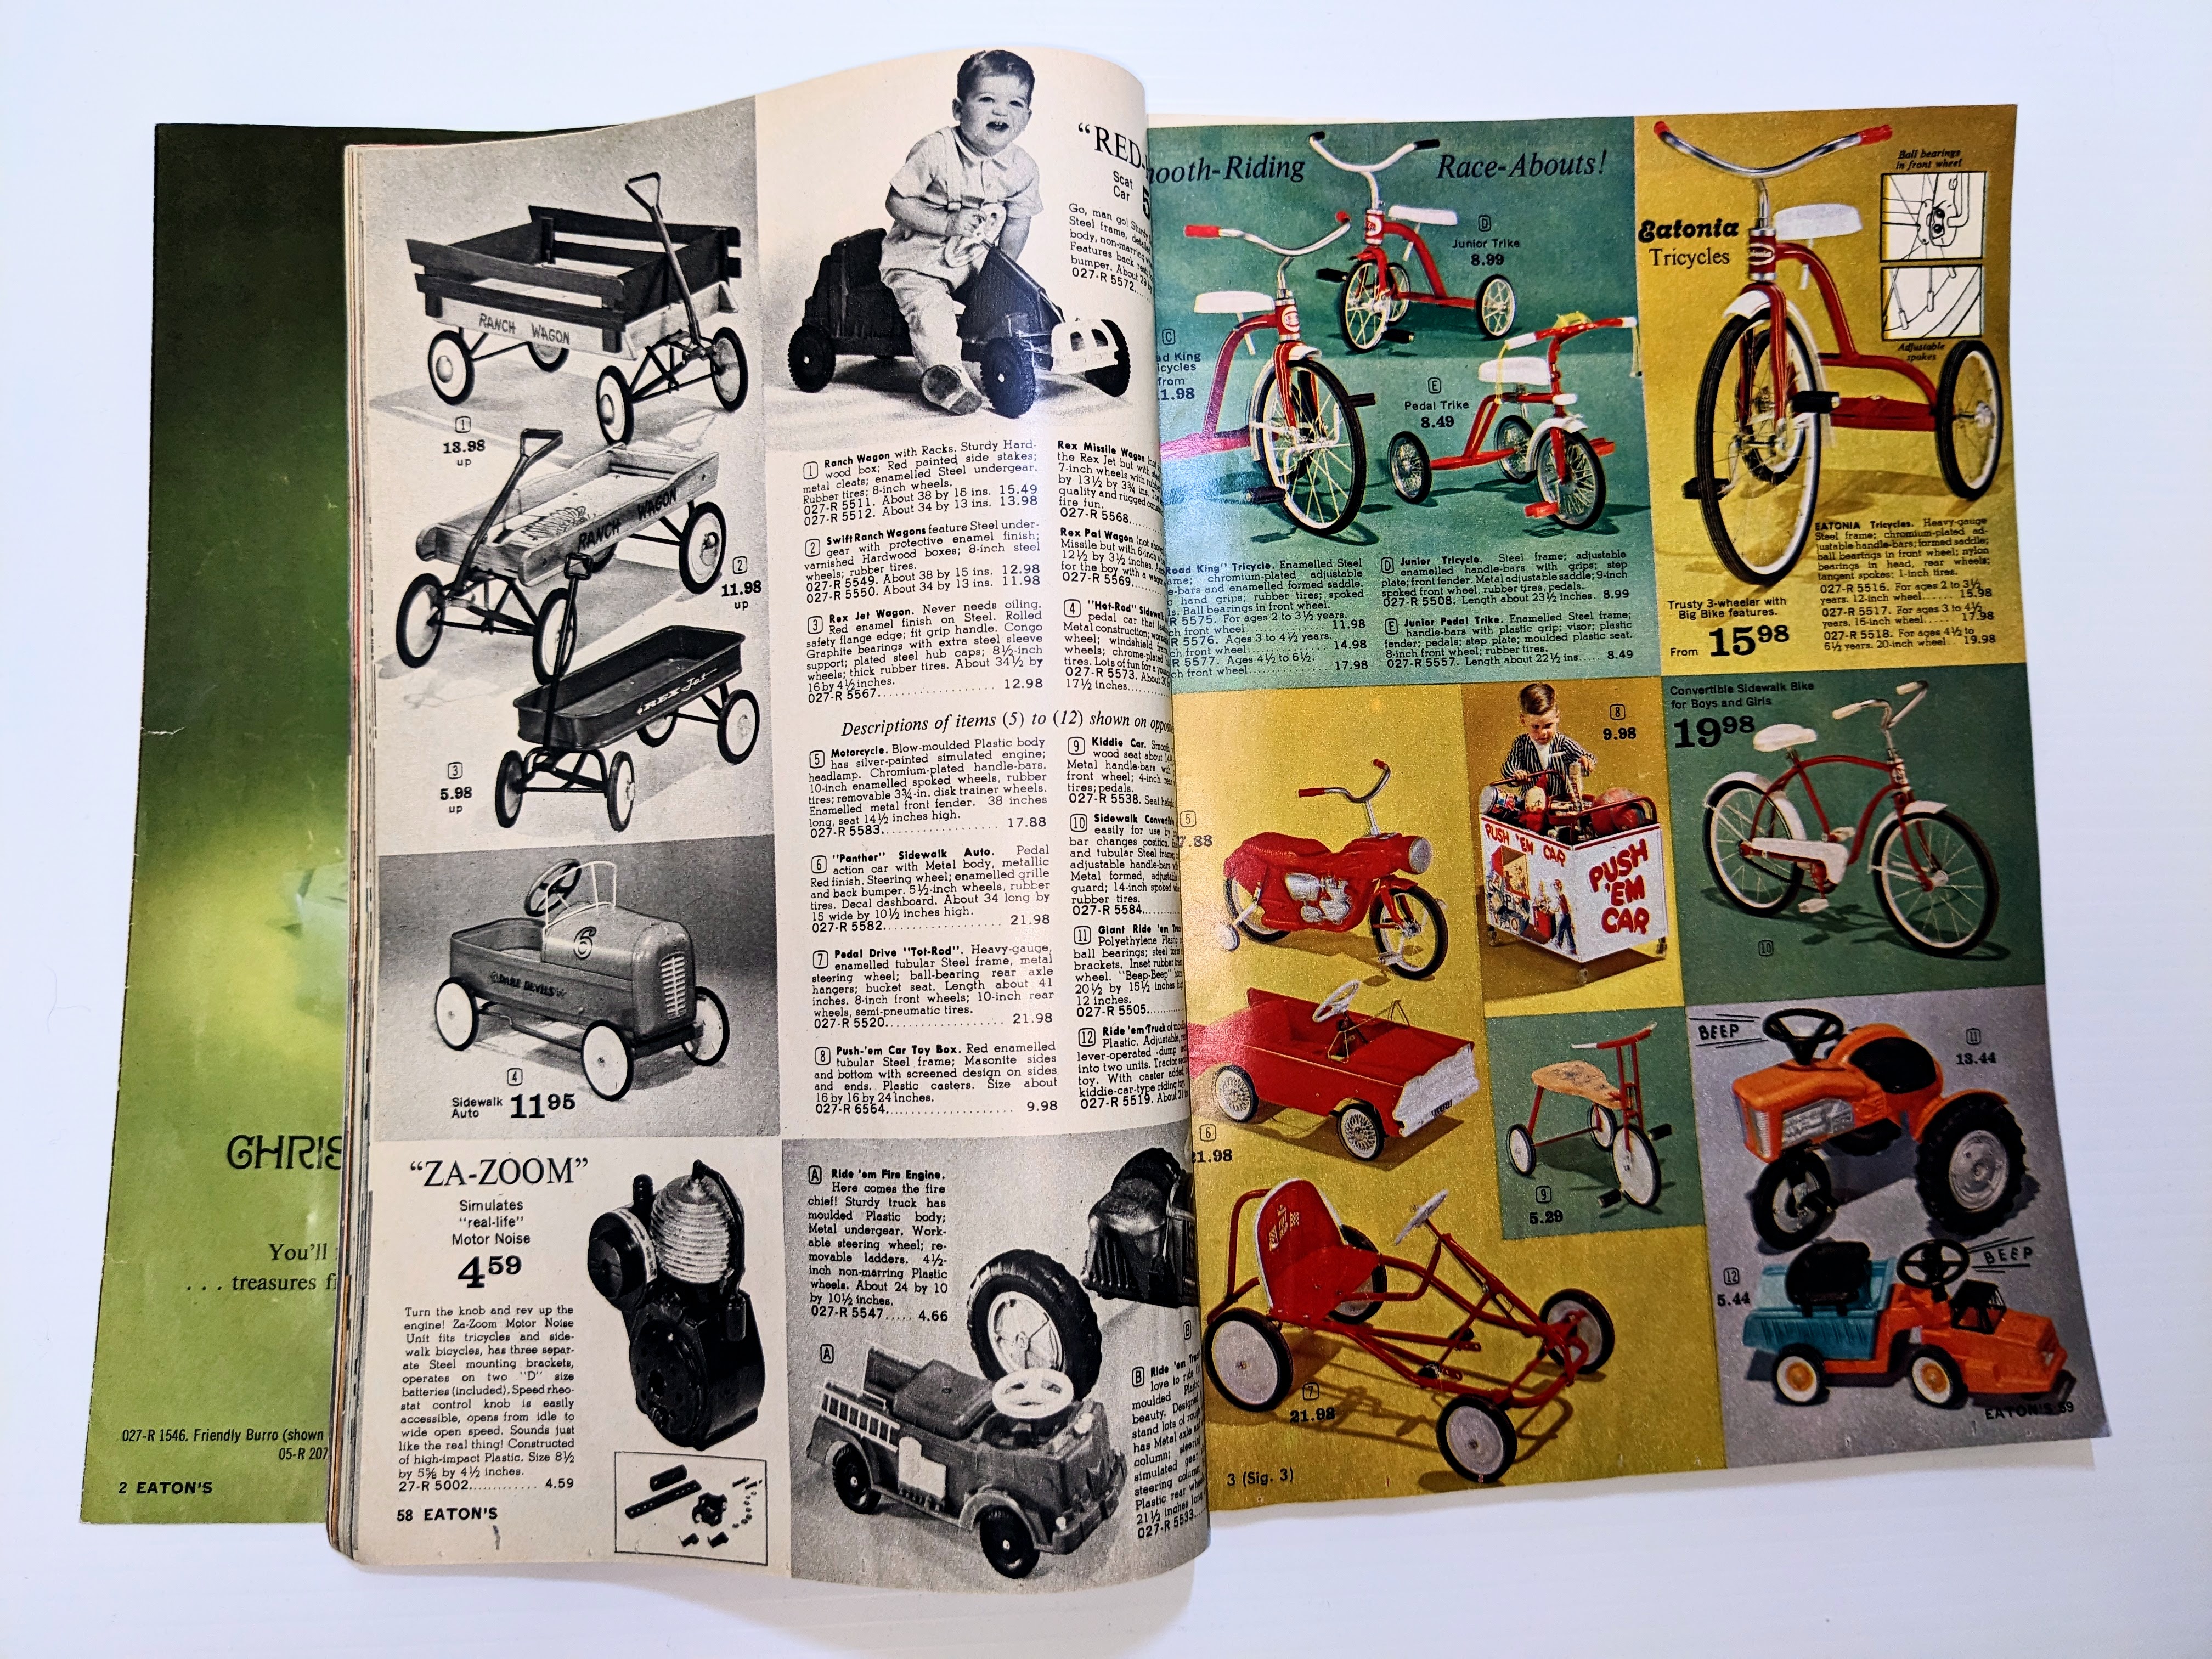 This is the Eatons Christmas Catalogue from 1964. Though this page only shows bicycles and the like, the catalogue contains anything from food and chocolates to chainsaws, furniture, clothing and jewelry. Such catalogues were integral to Christmas shopping as many of these items could not be purchased locally. Often when the season passed - such catalogues met their demise in "the little shack out back".
2020.06.14 / Smith, Louise
19/12/2022
